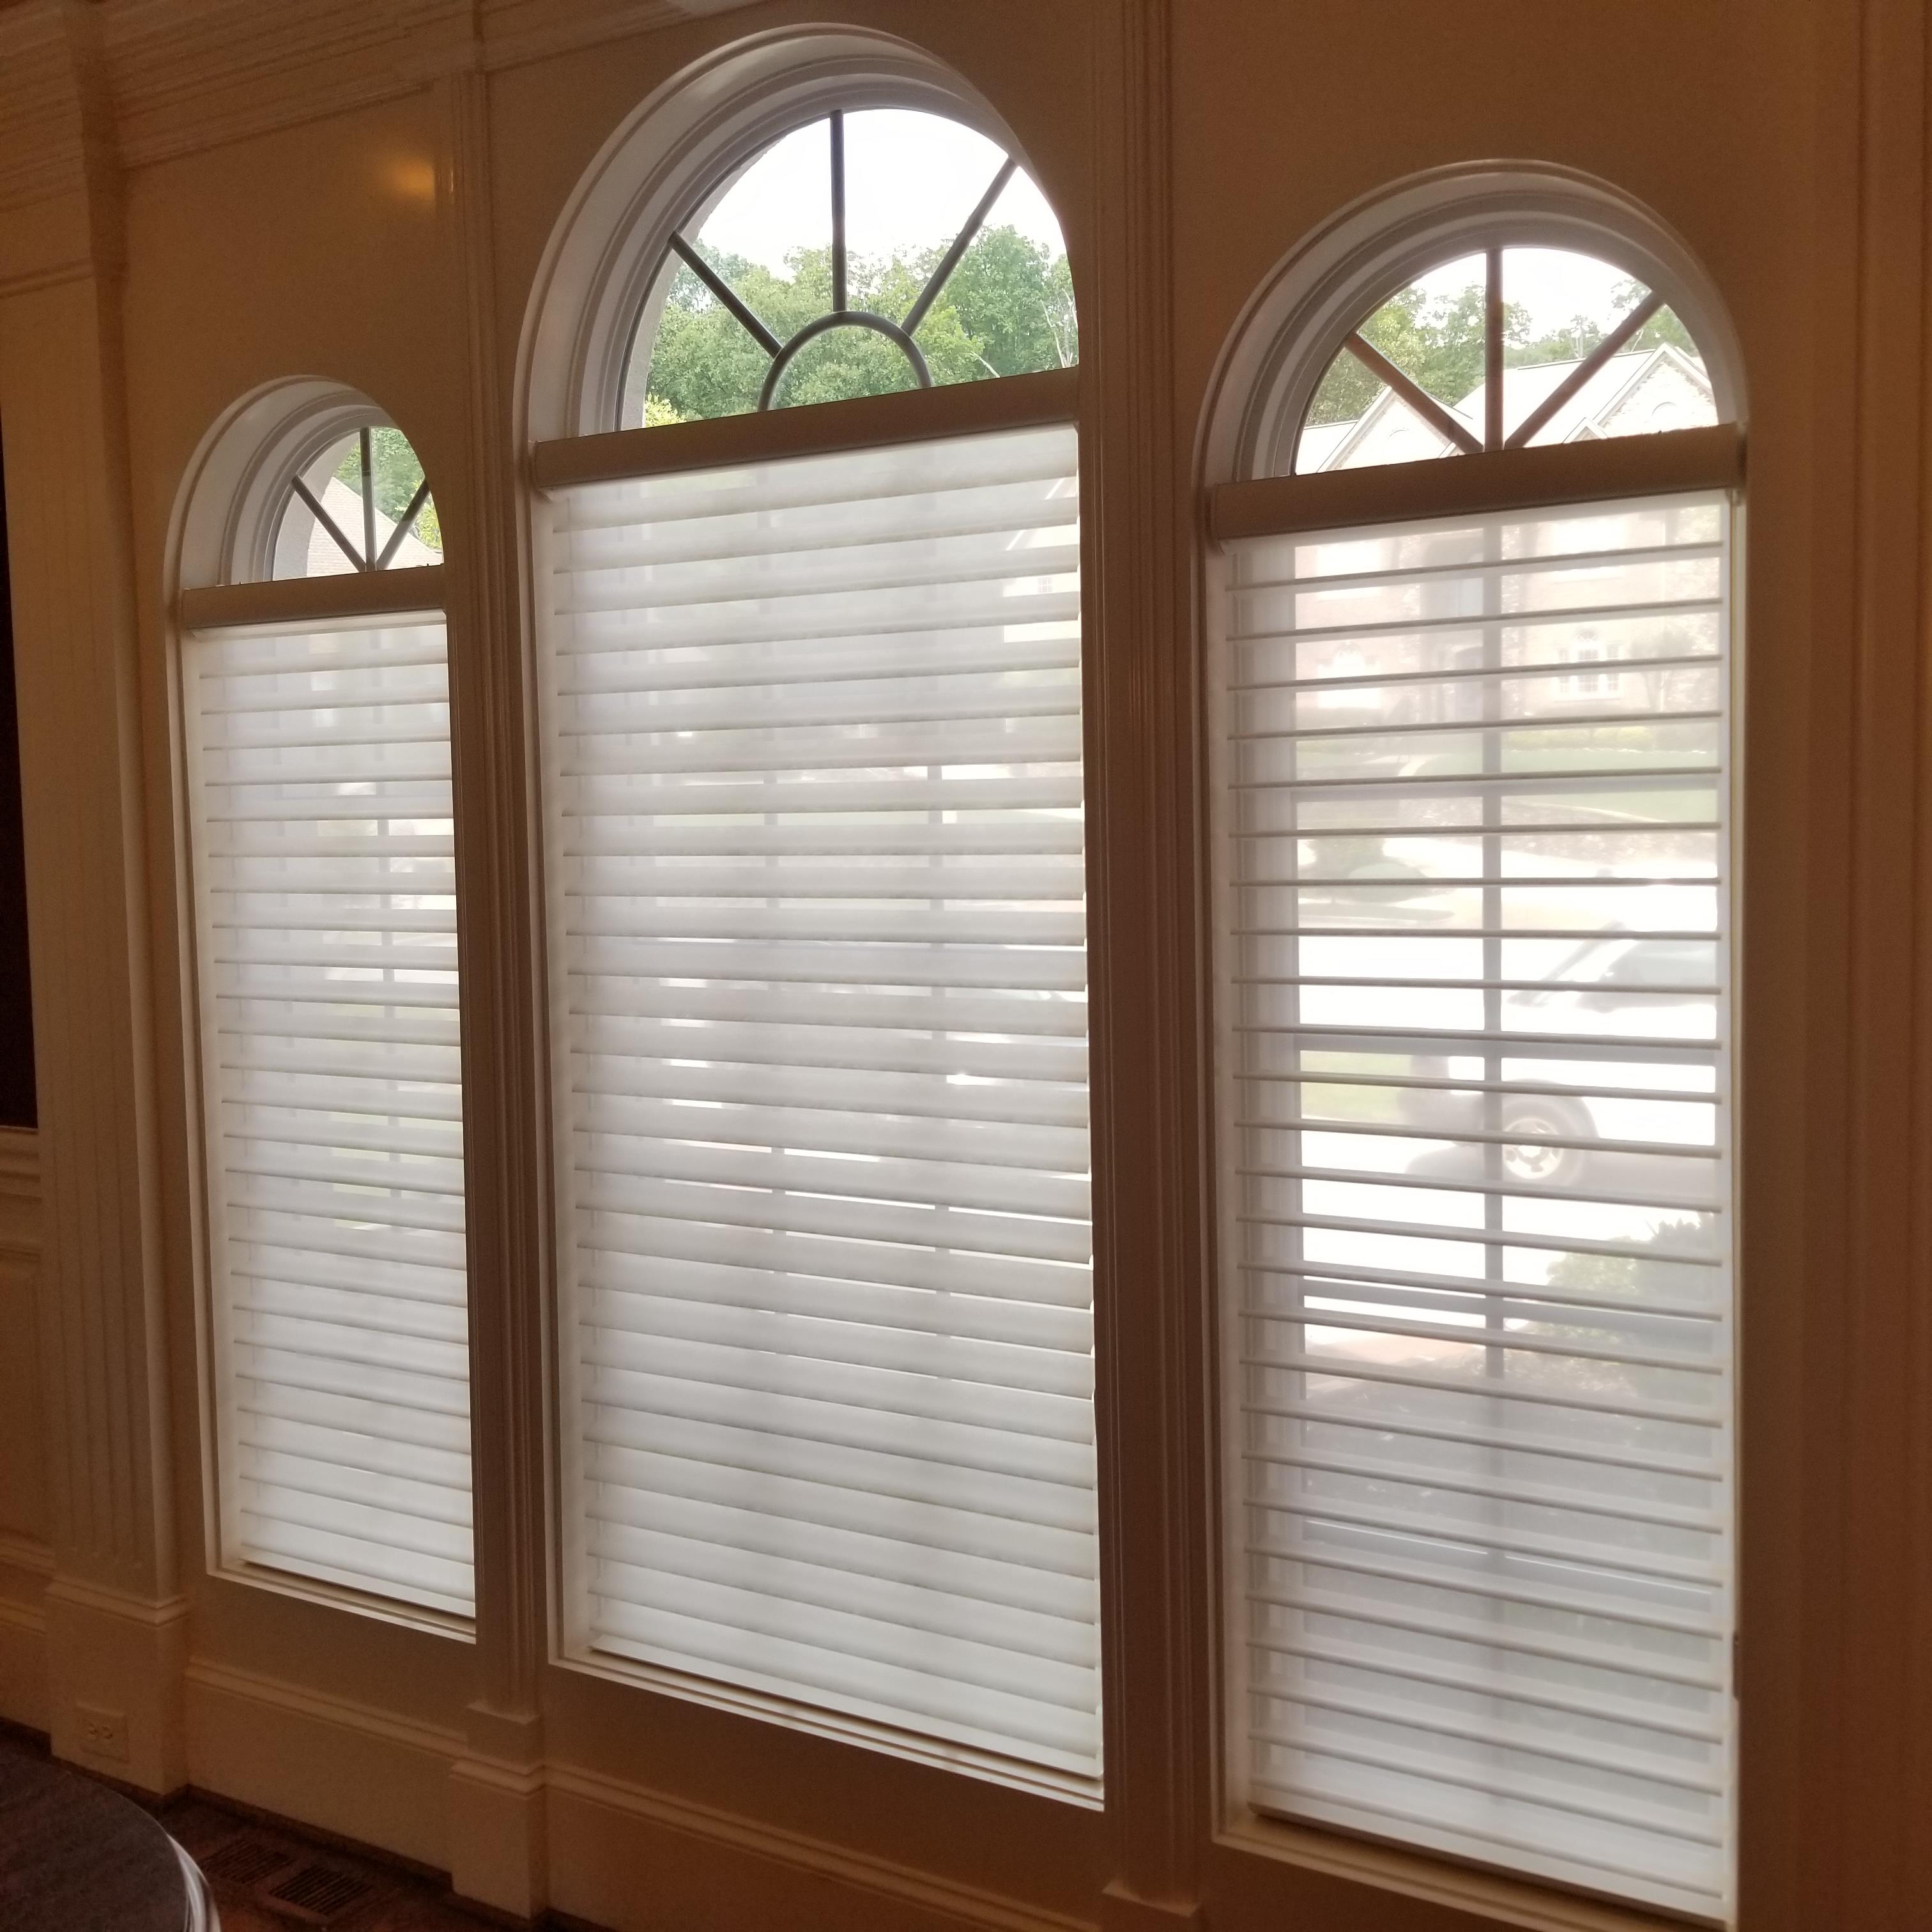 Beautiful windows but now dressed with Window Shadings for privacy, light control and elegance!